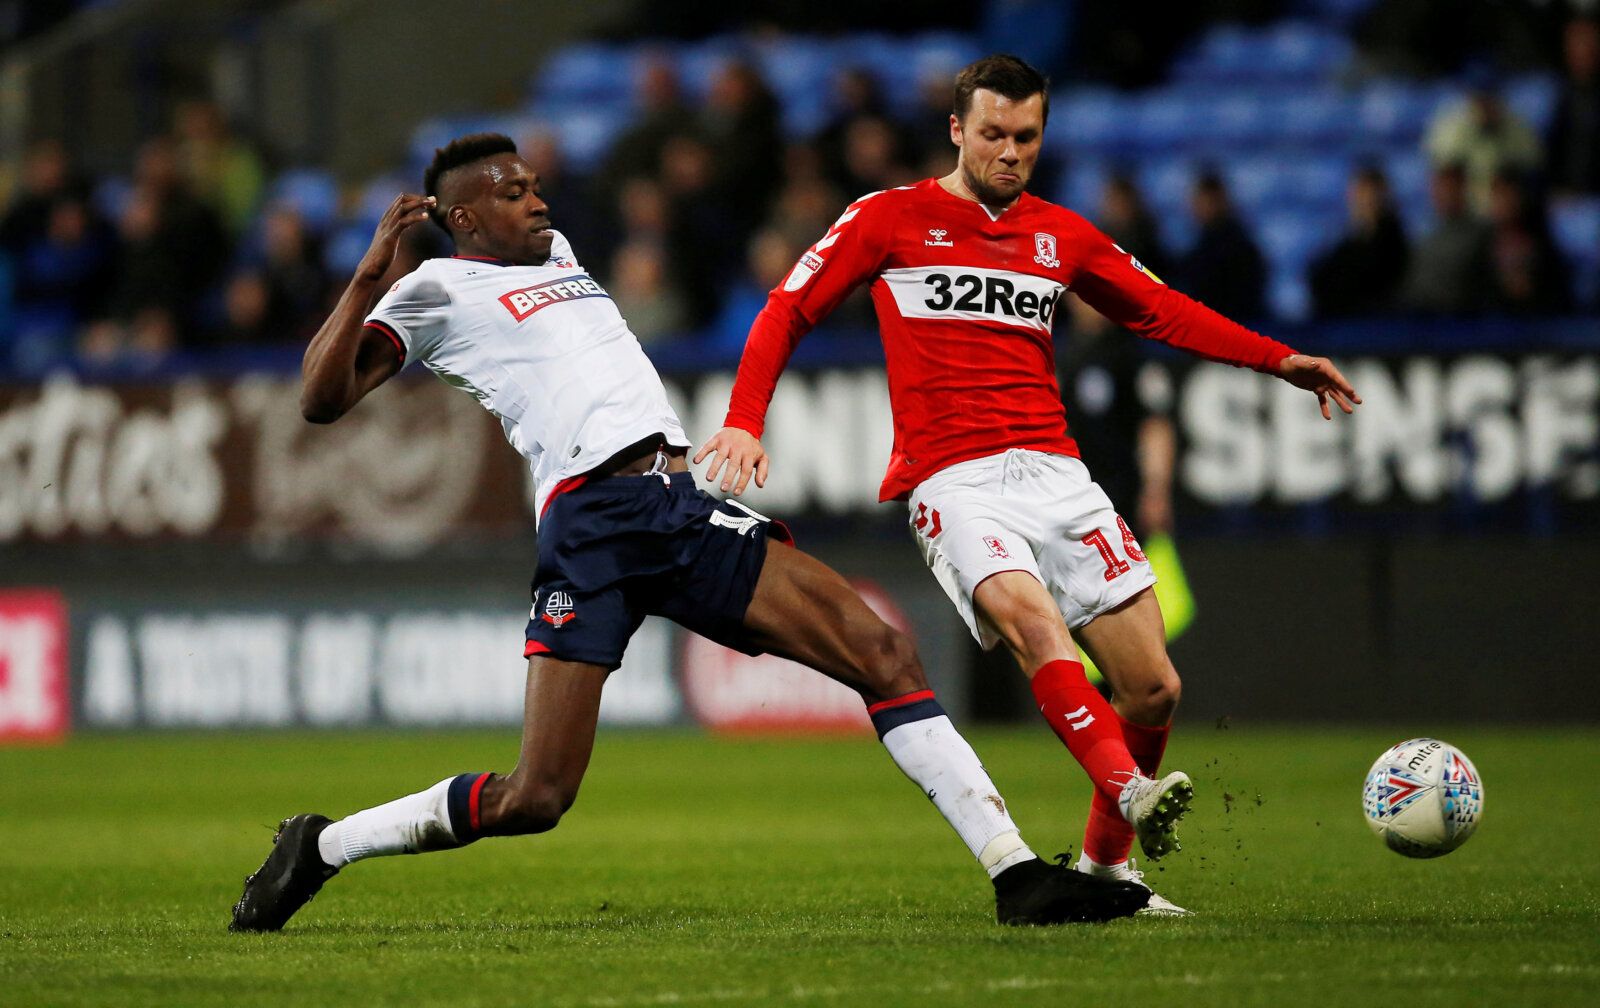 Soccer Football - Championship - Bolton Wanderers v Middlesbrough - University of Bolton Stadium, Bolton, Britain - April 9, 2019   Bolton Wanderers' Sammy Ameobi in action with Middlesbrough's Jonathan Howson   Action Images/Craig Brough    EDITORIAL USE ONLY. No use with unauthorized audio, video, data, fixture lists, club/league logos or 